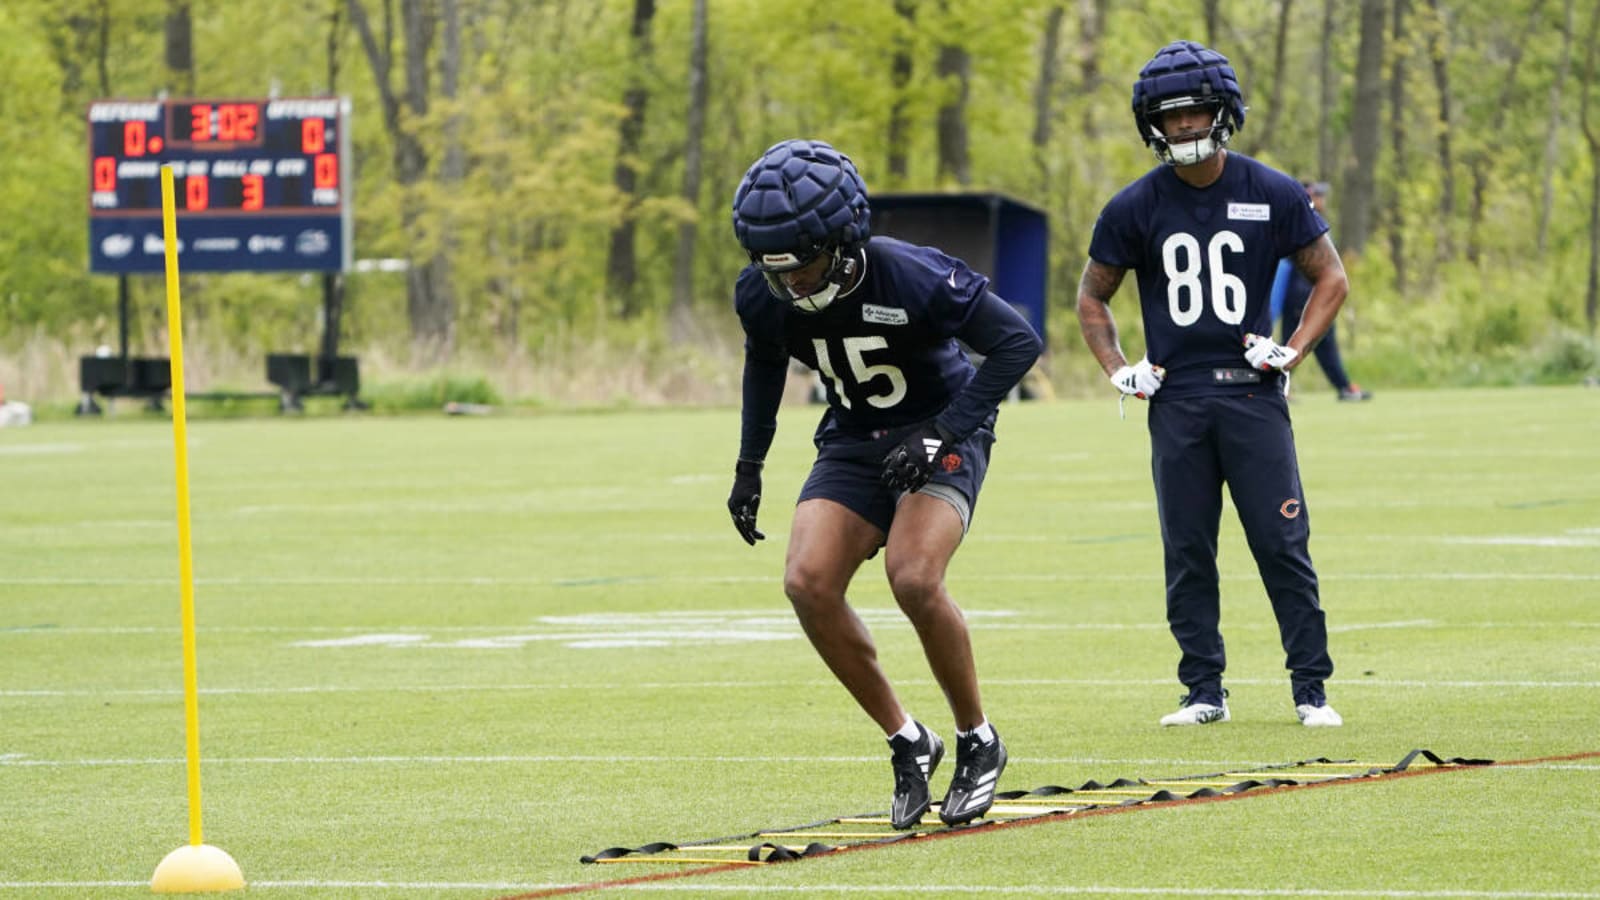 Chicago Bears already suffer a minor blow with first round wide receiver before Day 2 of rookie minicamp